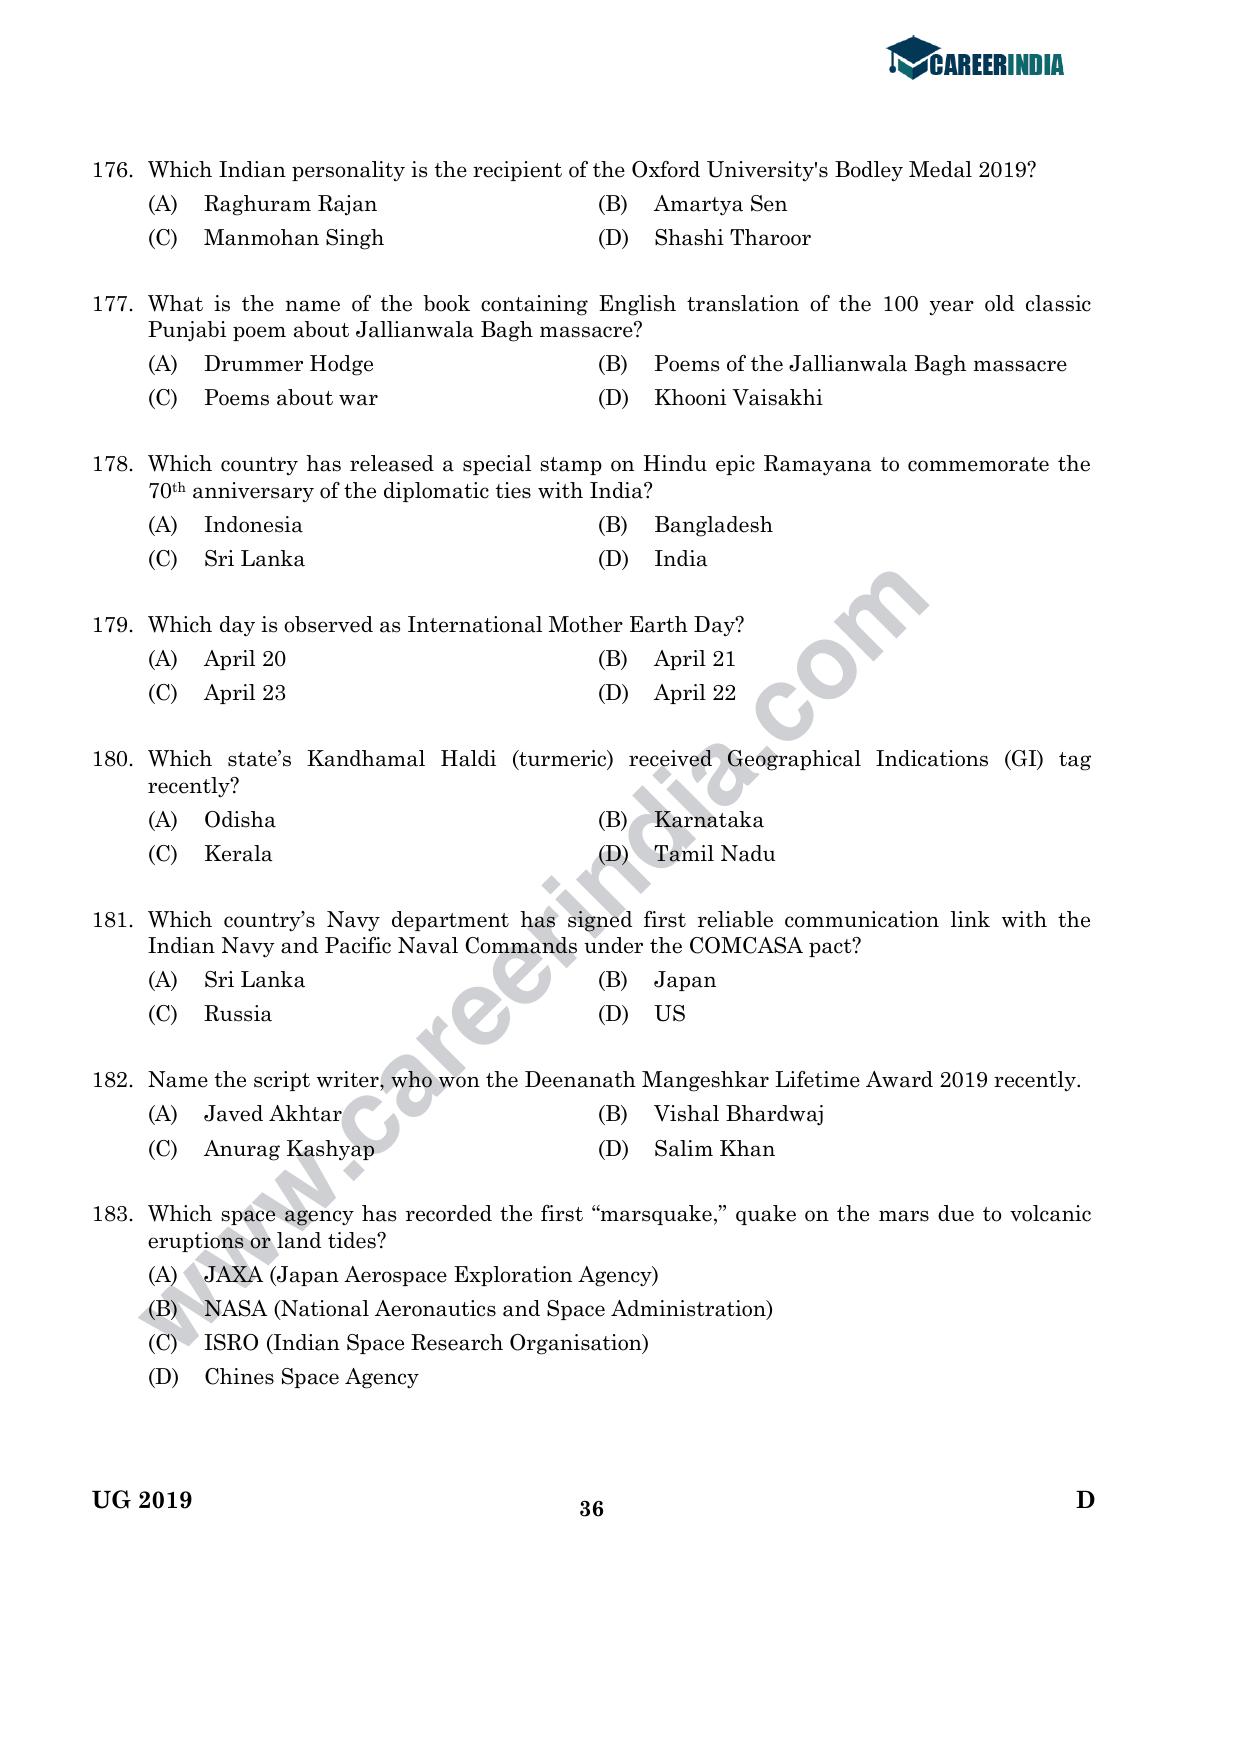 CLAT 2019 UG Logical-Reasoning Question Paper - Page 35